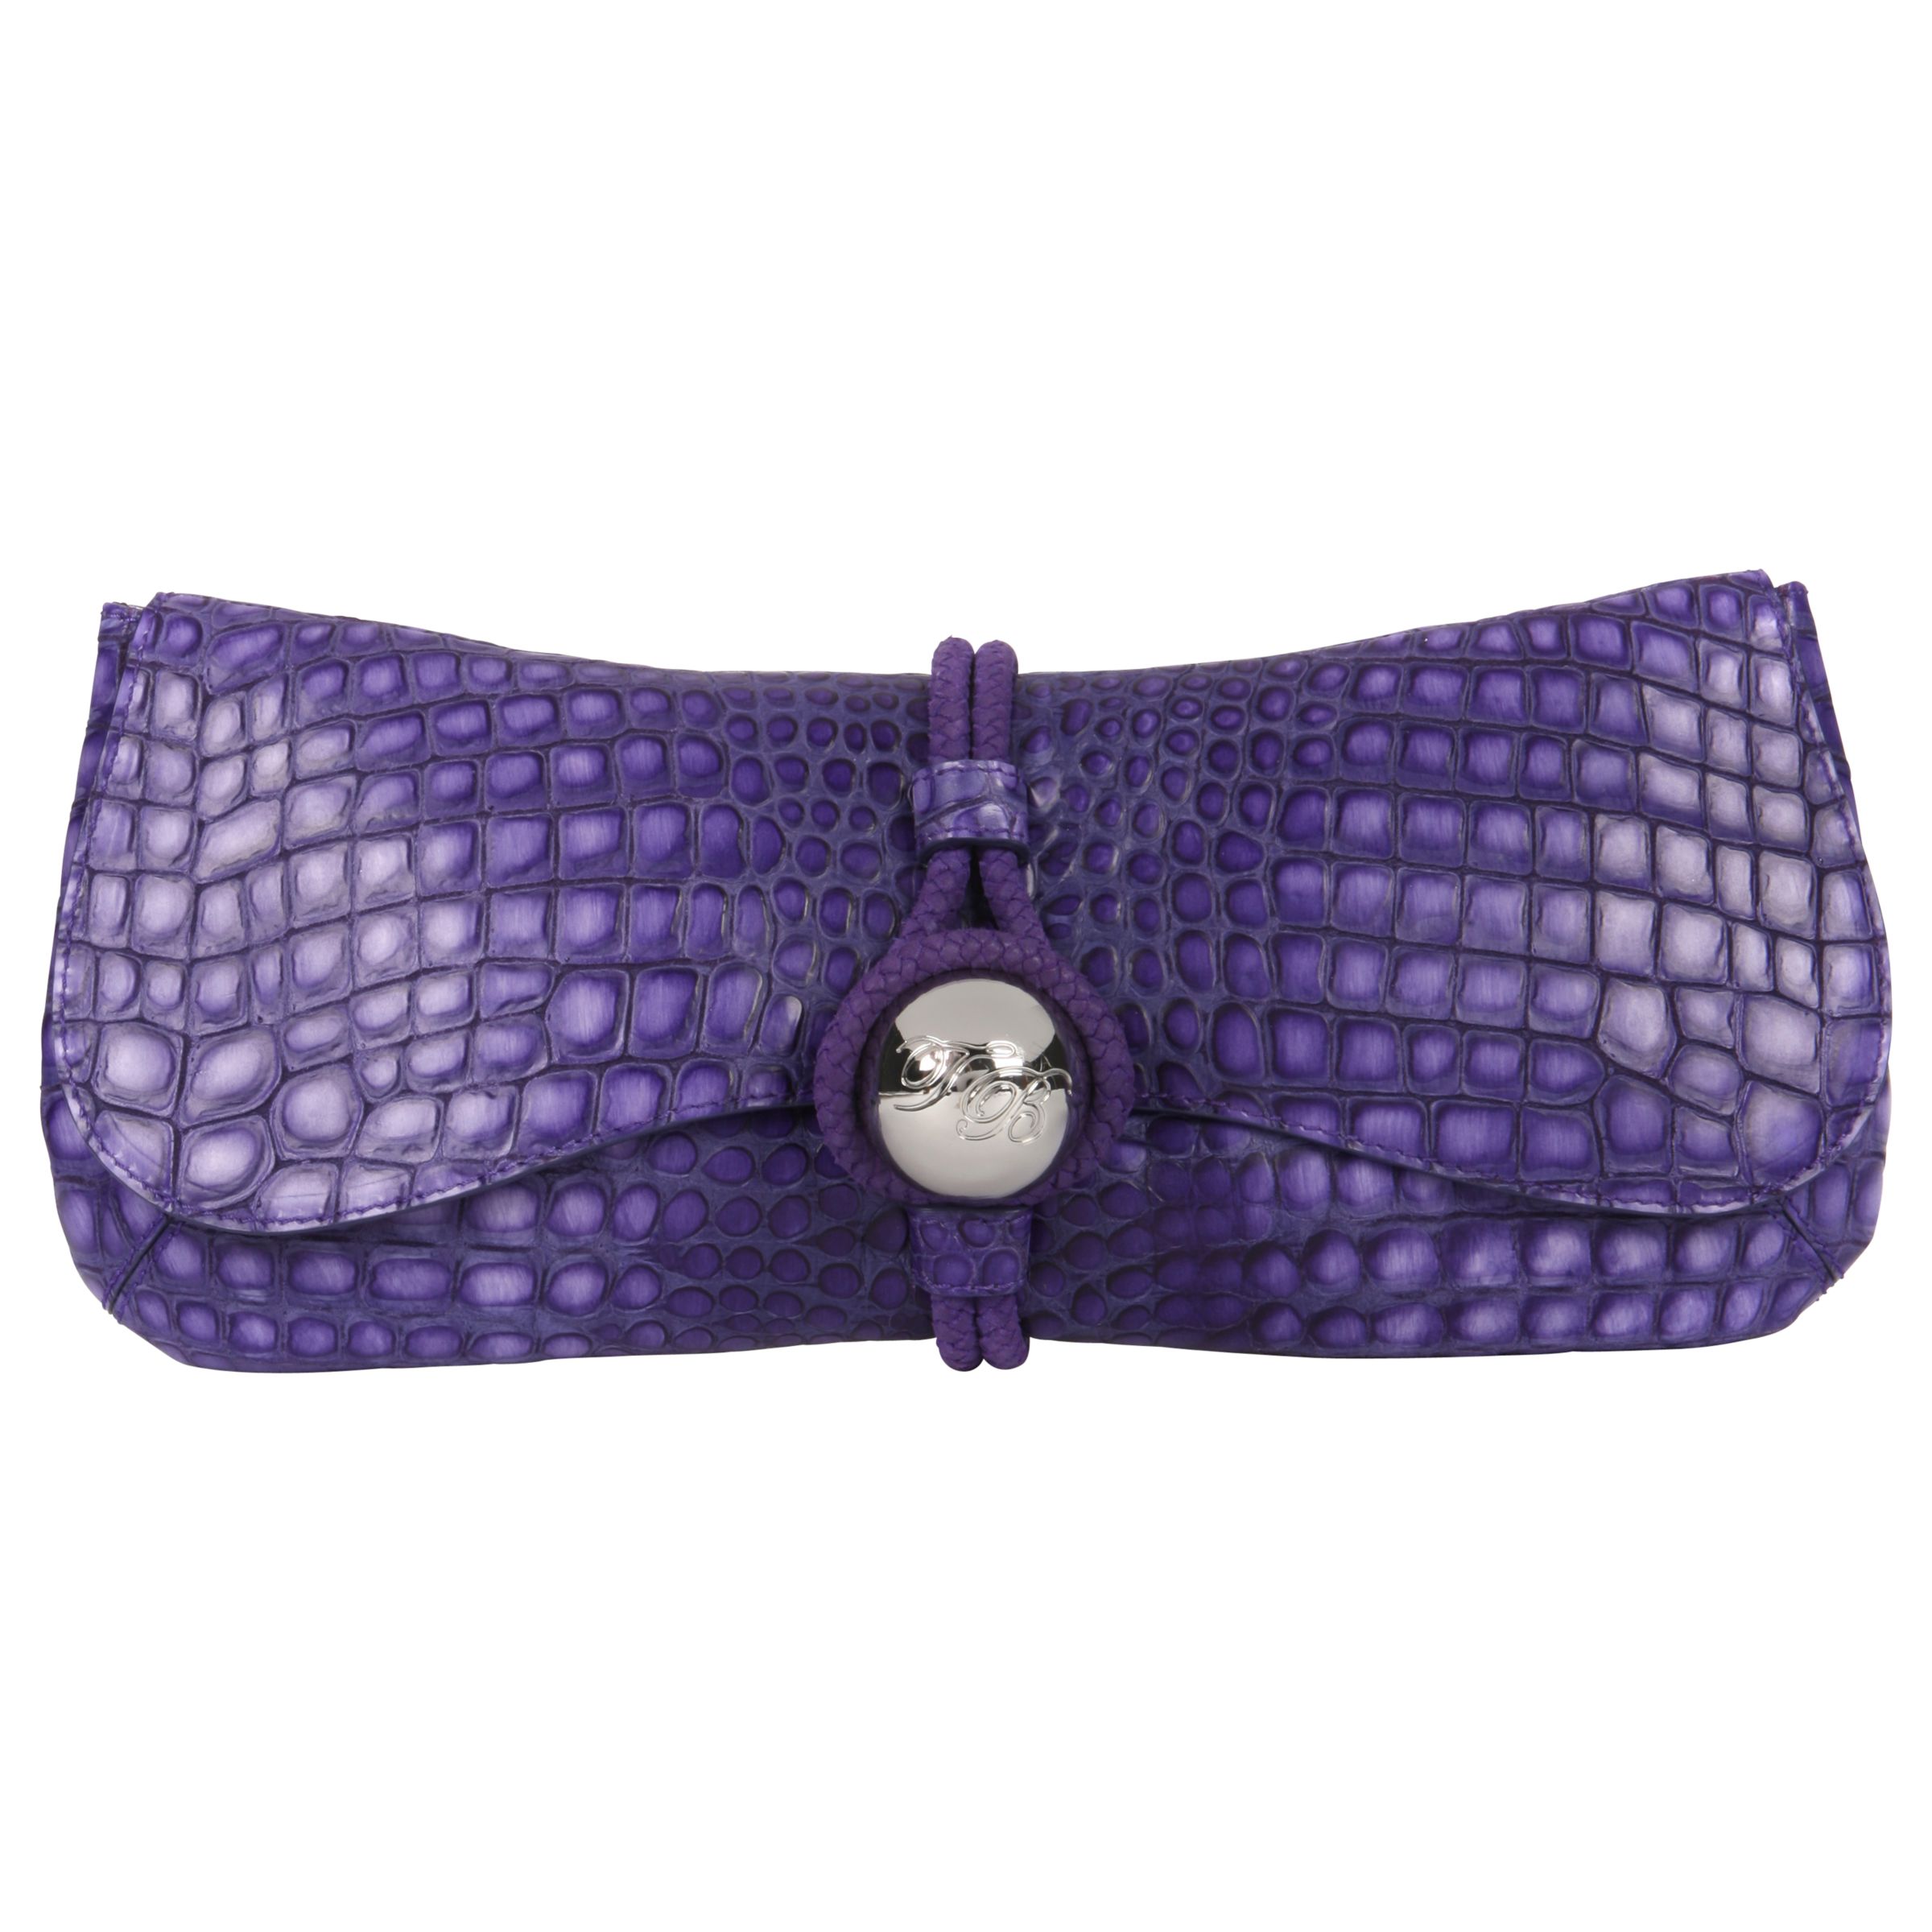 Ted Baker Maddie Textured Fold Over Clutch Bag, Purple at John Lewis